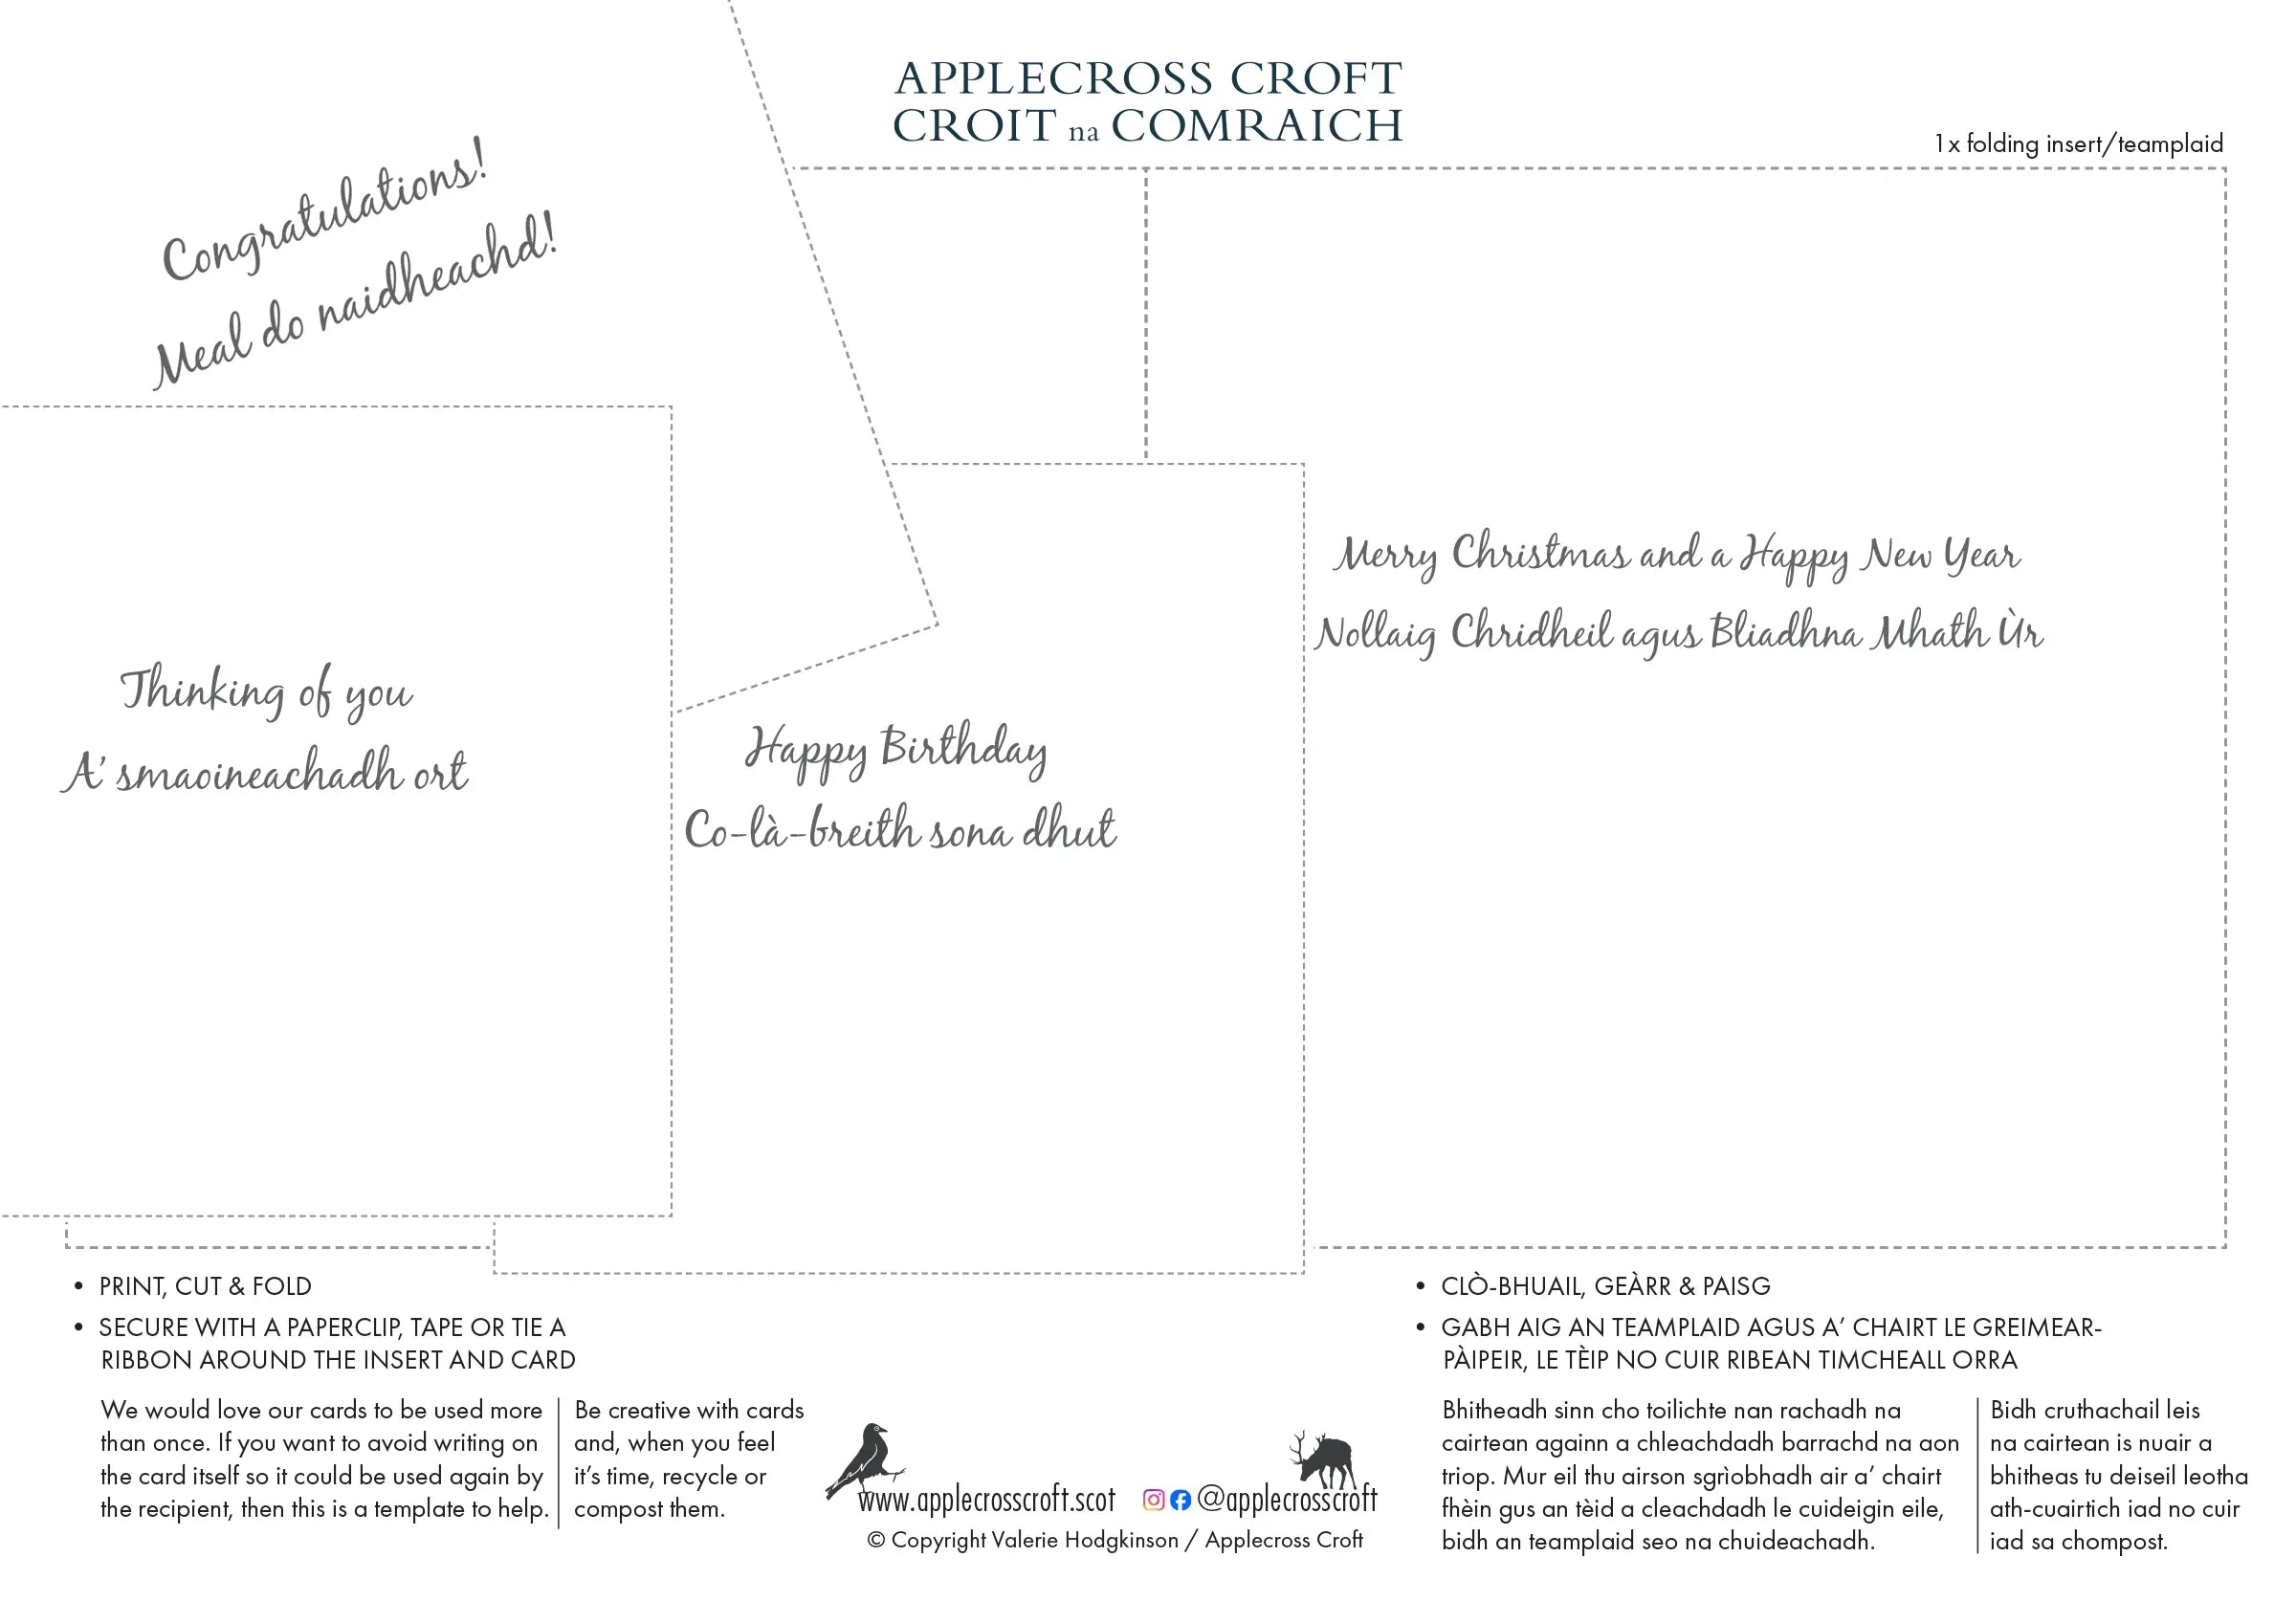 Card inserts are available to download free from Applecross Croft